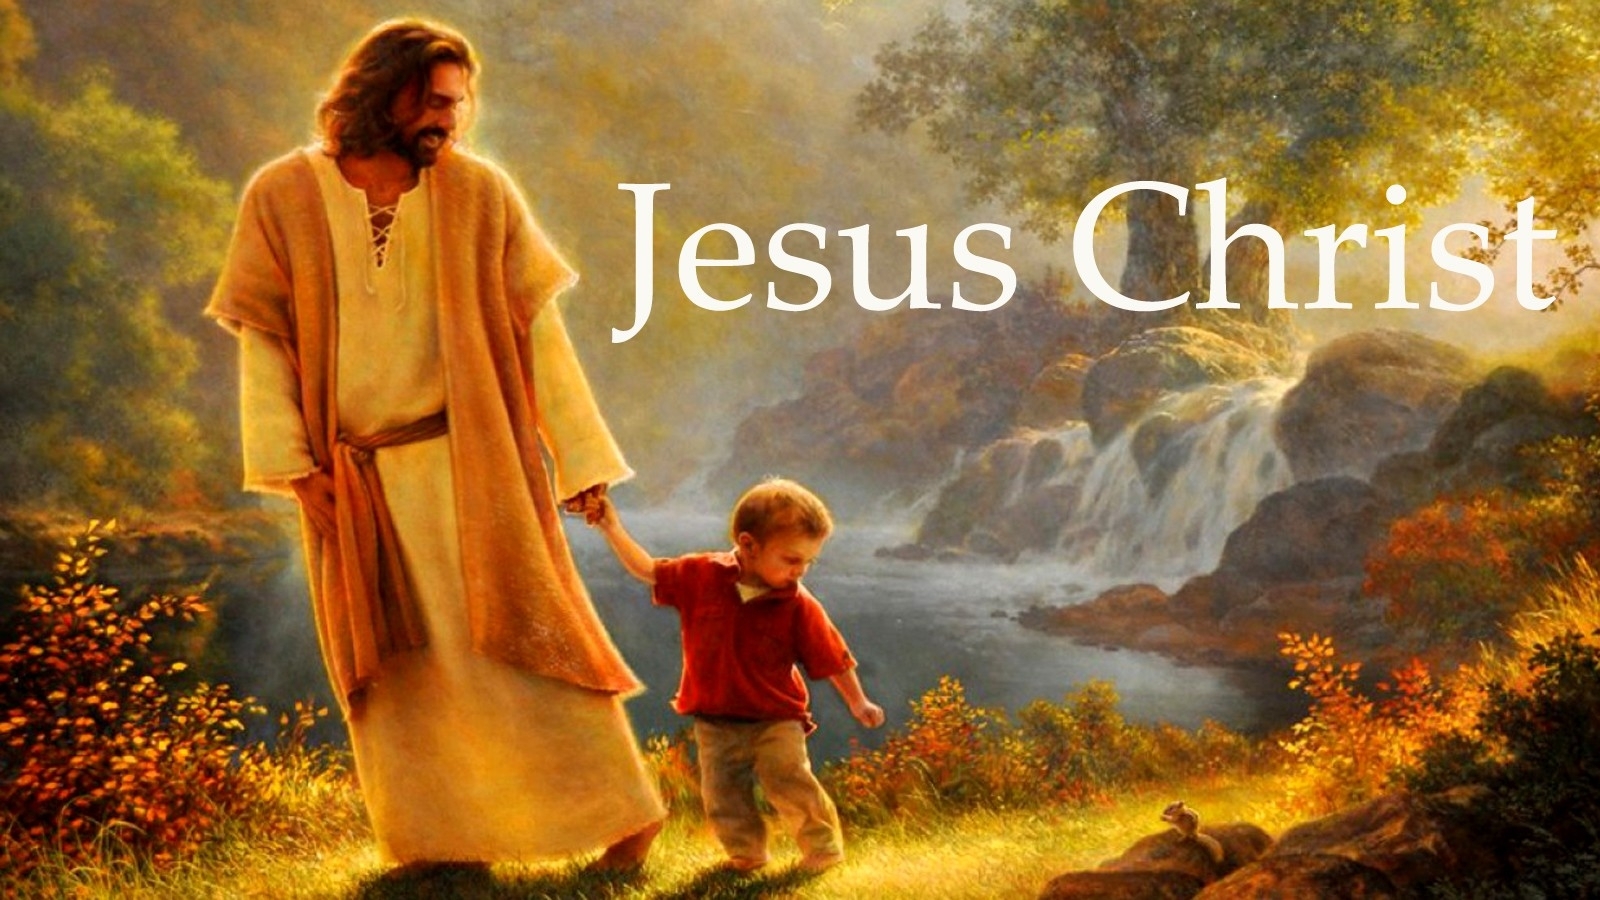 10 New Jesus Christ Wallpapers Hd FULL HD 1920×1080 For PC ...